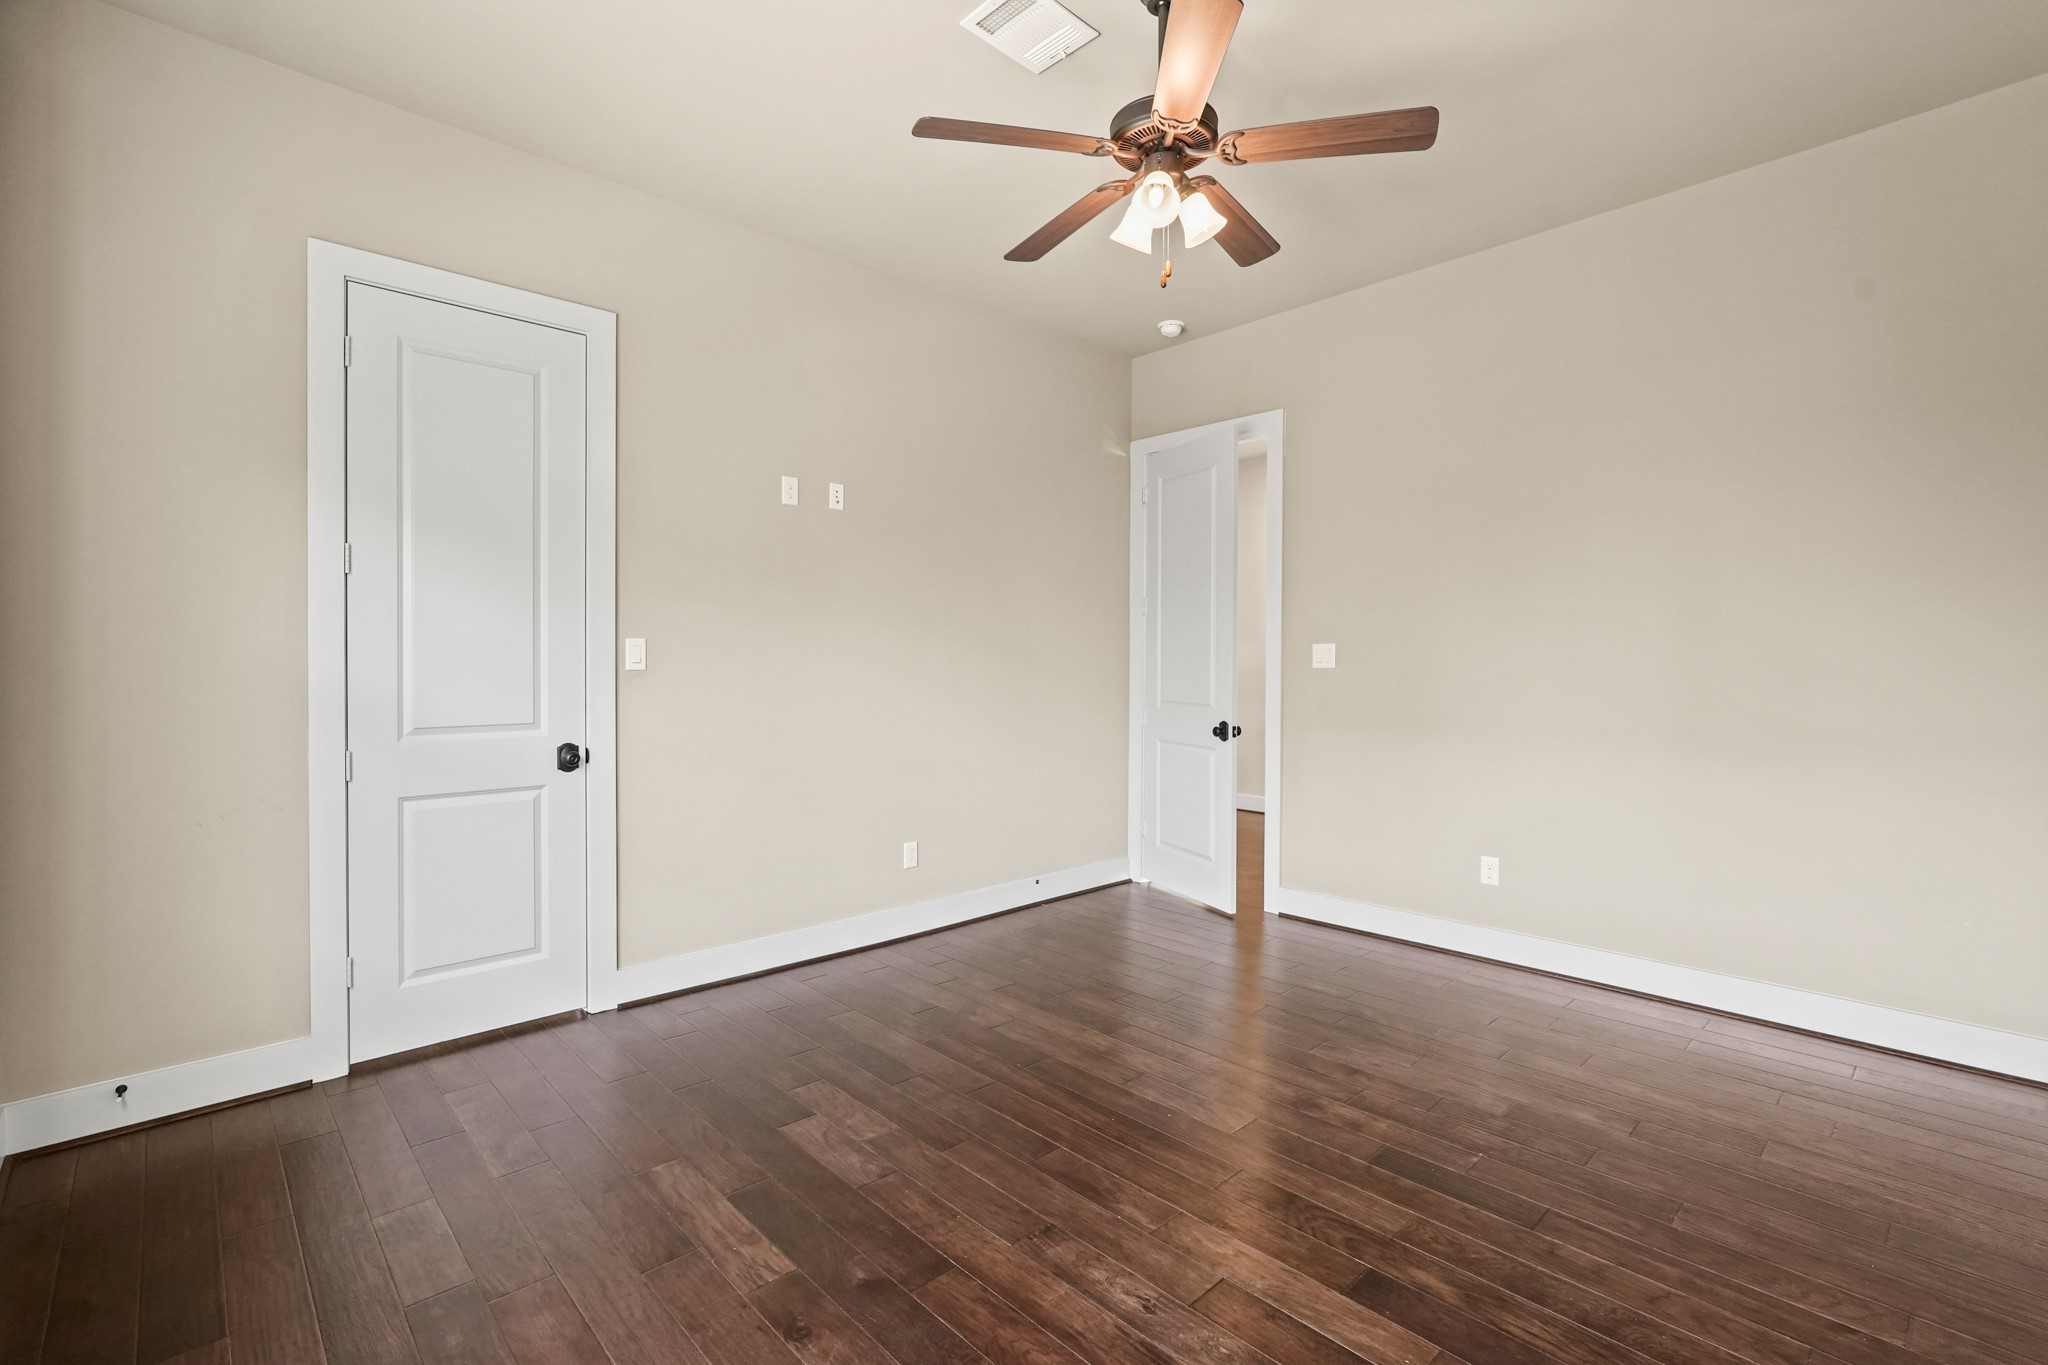 3rd upstairs bedroom features wood flooring and walk in closets.